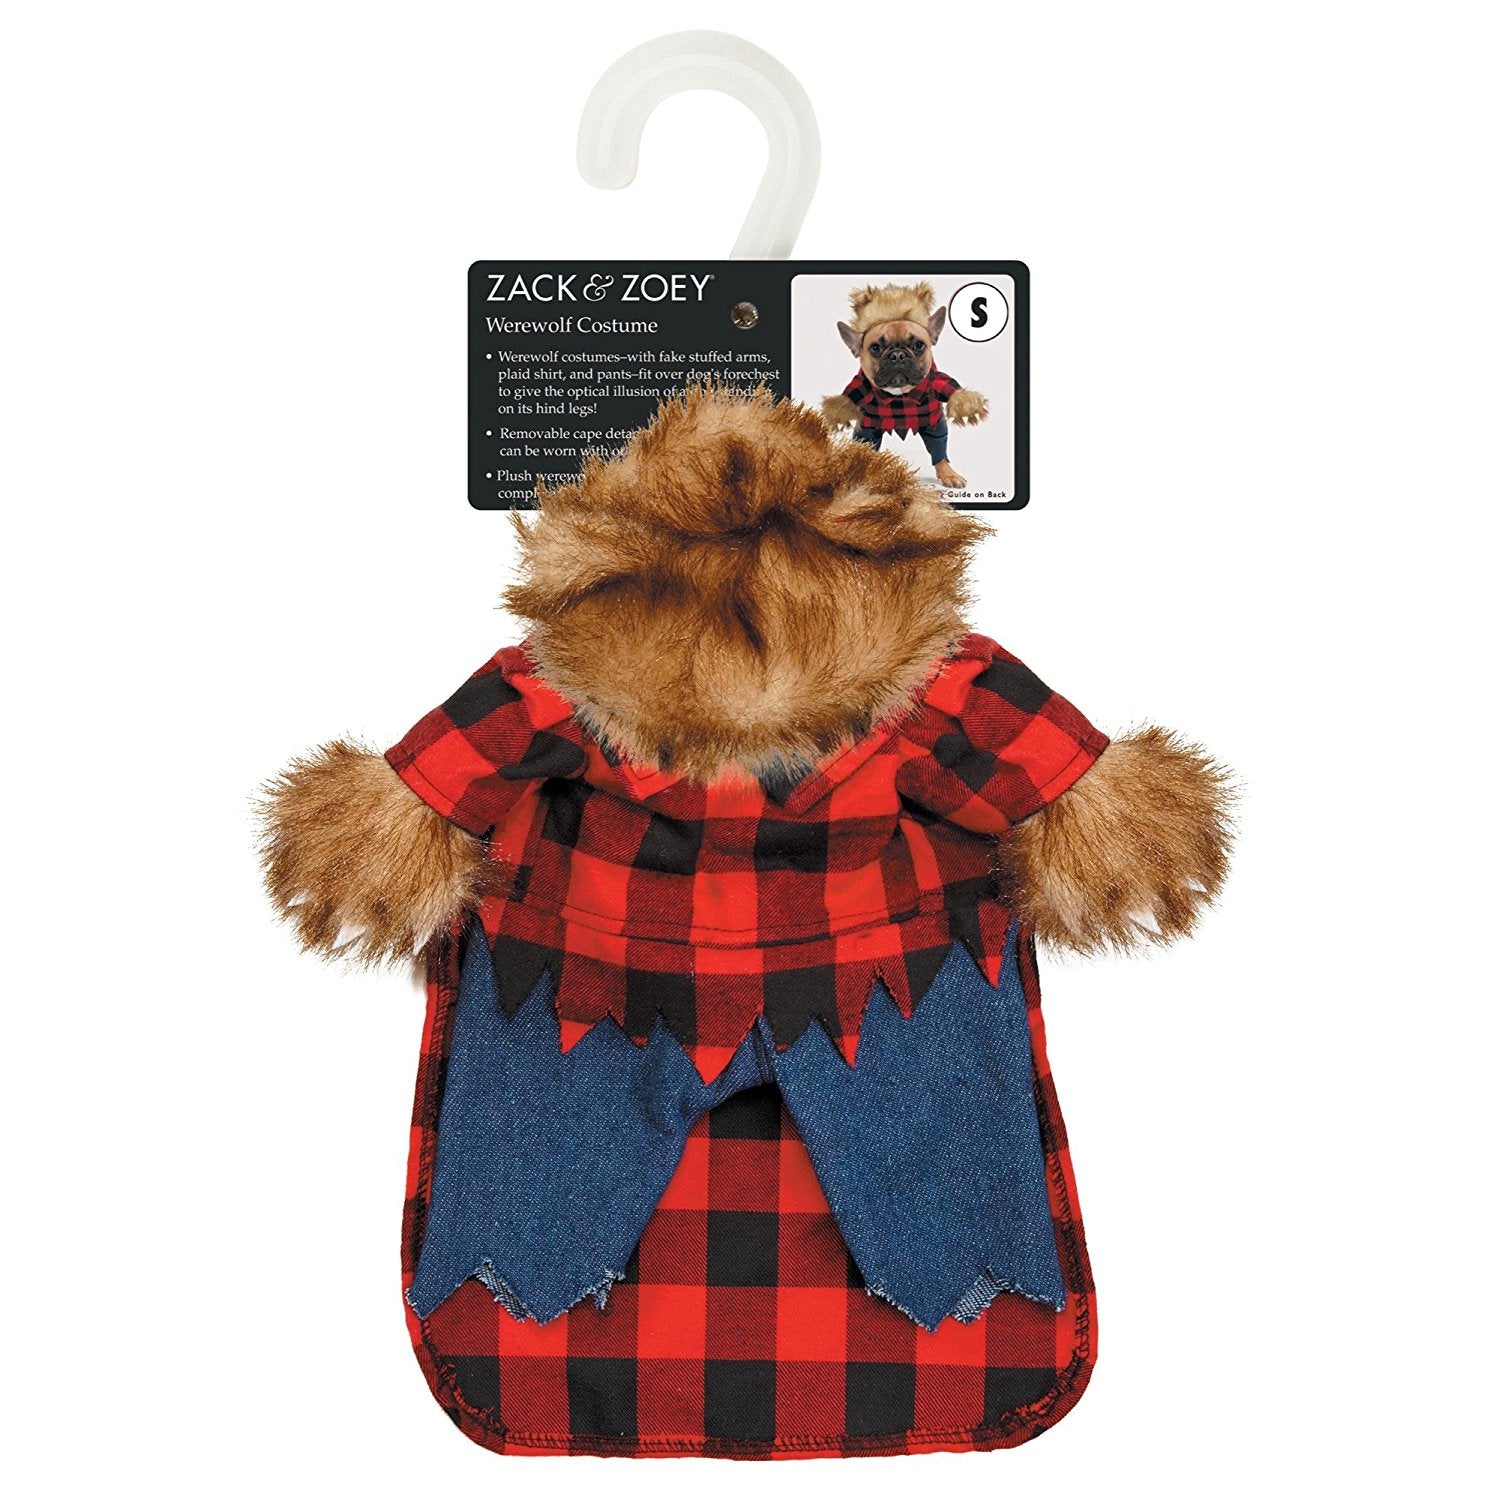 Zack & Zoey Werewolf Costume for Dogs, Large – Midlee Designs